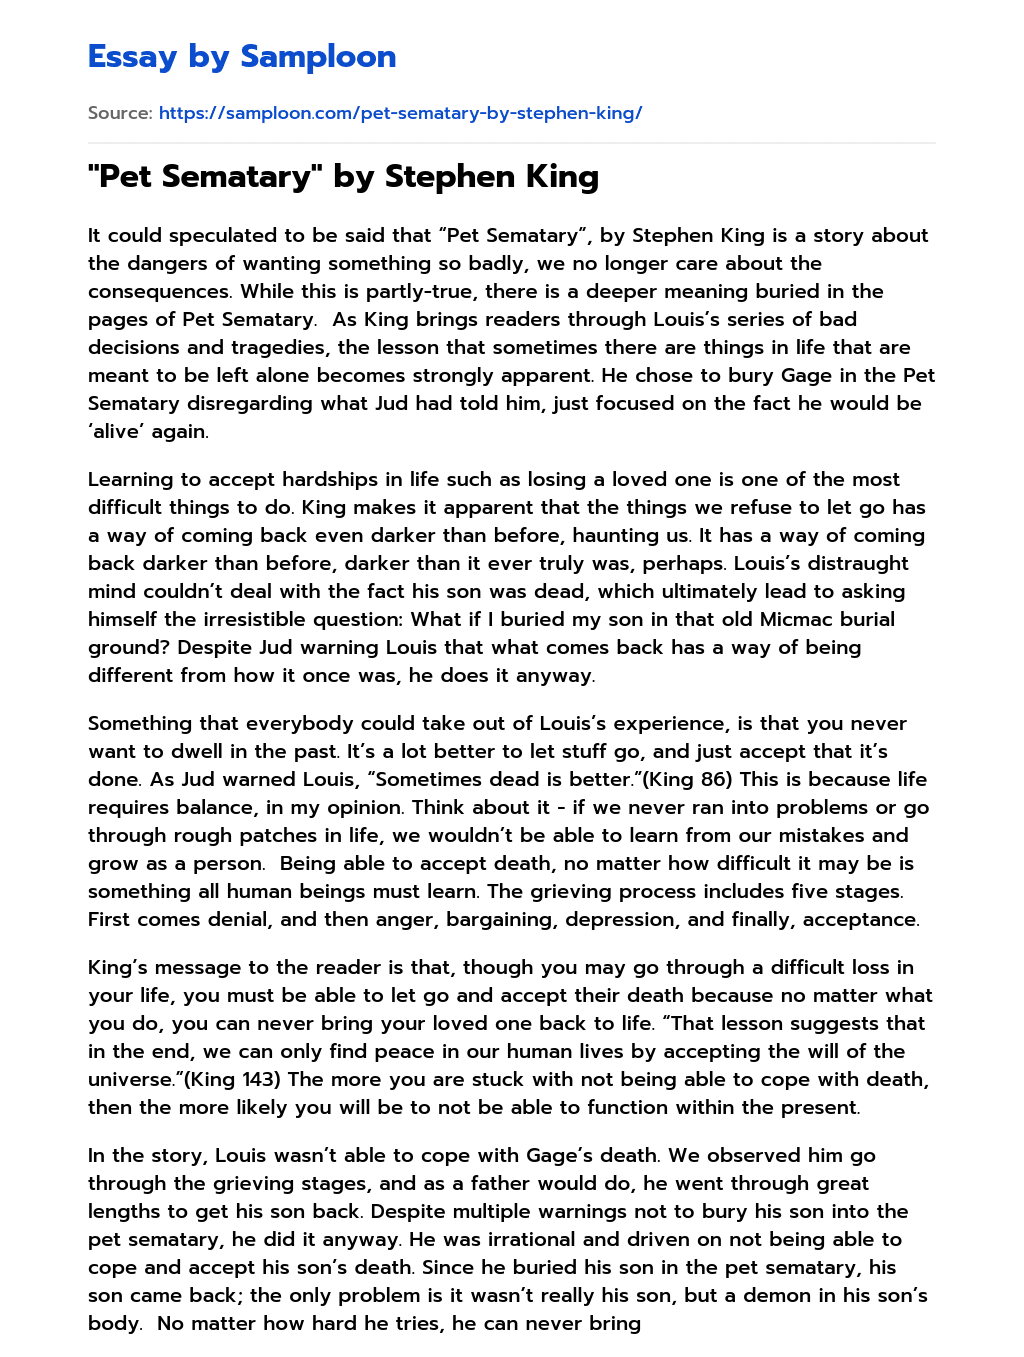 “Pet Sematary” by Stephen King essay